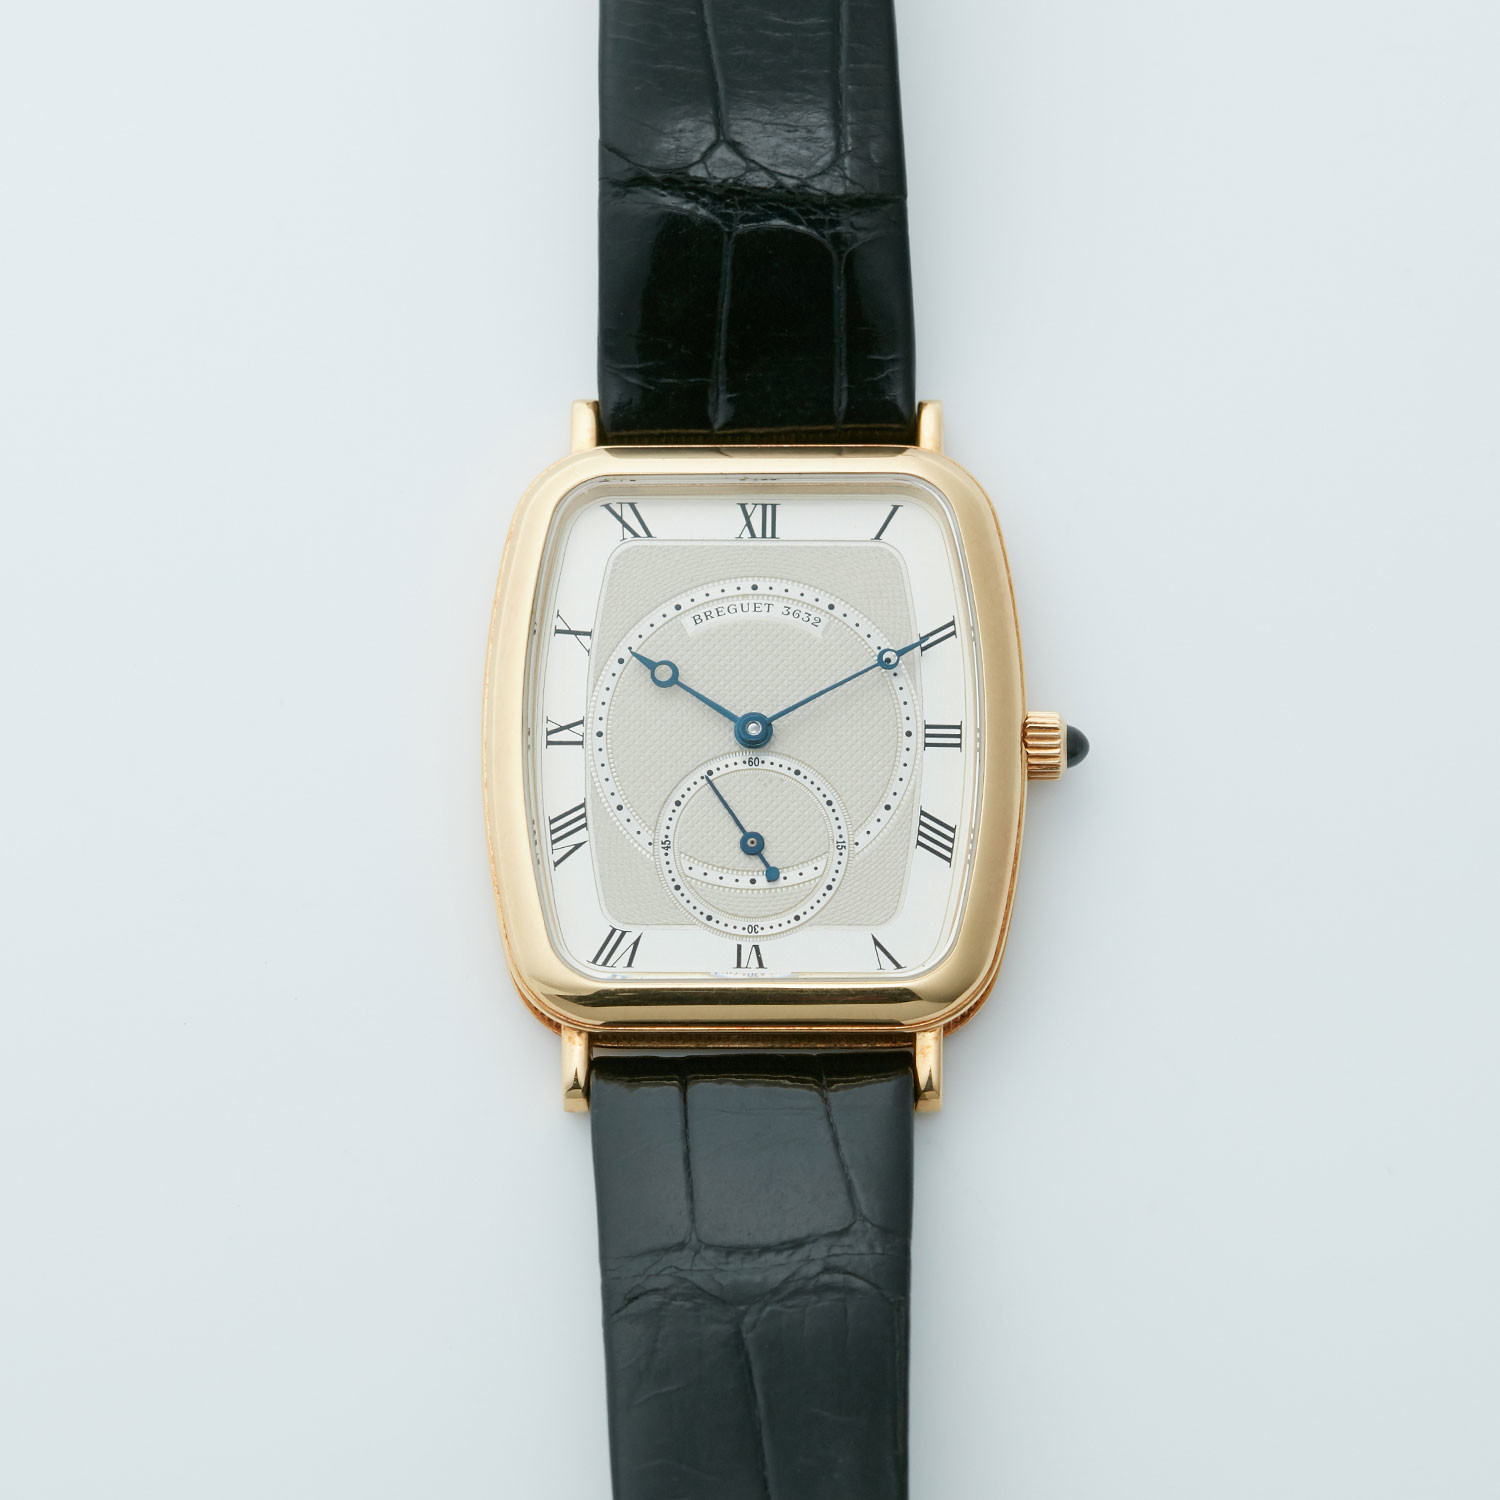 Breguet Classique Manual Wind // 3490 // Pre-Owned - Excellent Watches ...